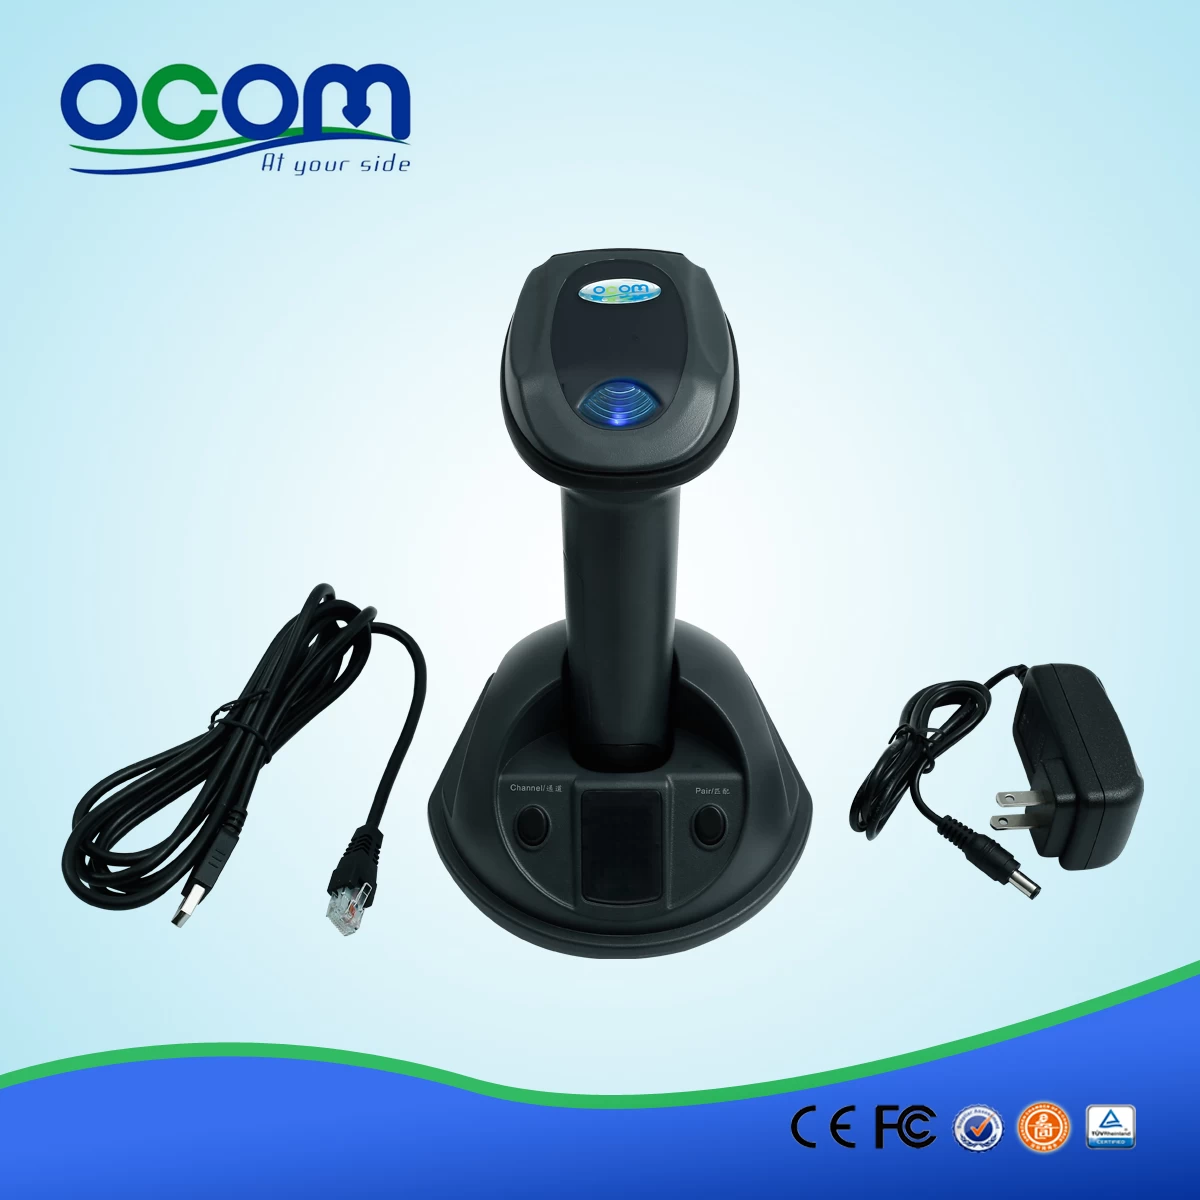 OCBS-W800 433MHz wireless portable barcode scanner with memory